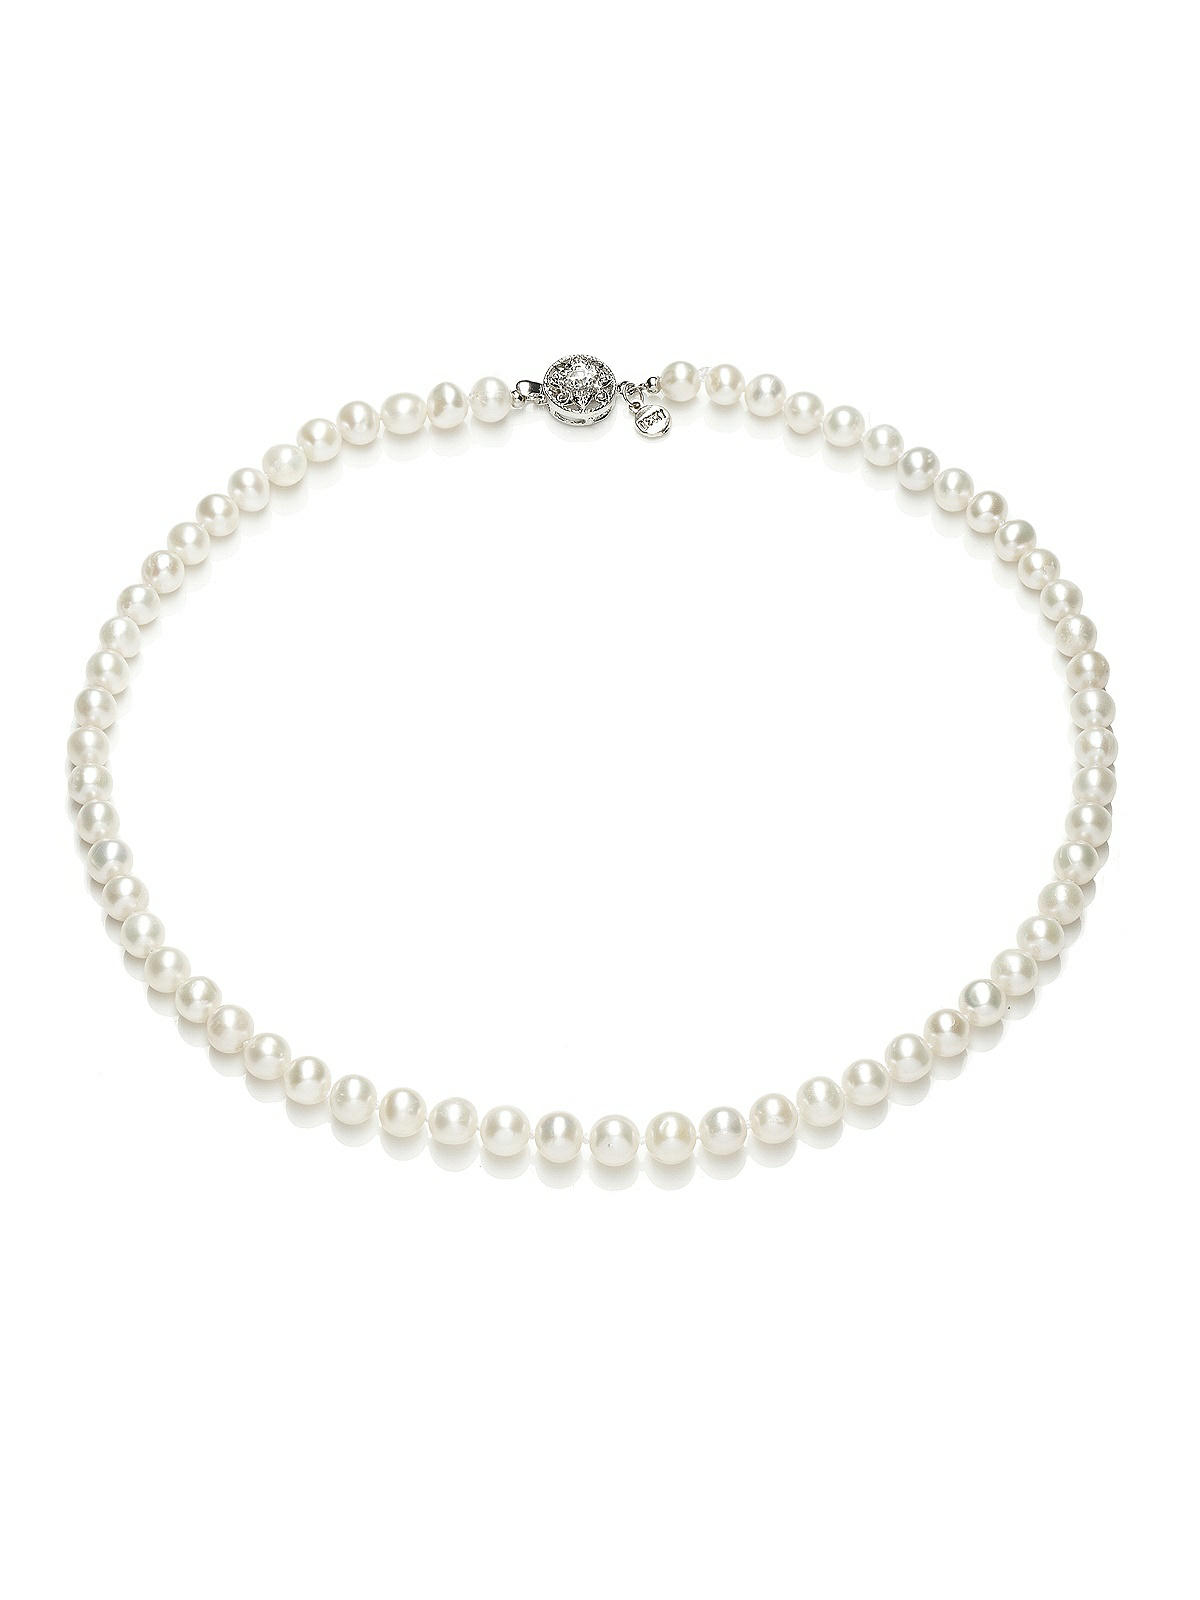 Genuine Freshwater Pearl Necklace - 18 inch | The Dessy Group